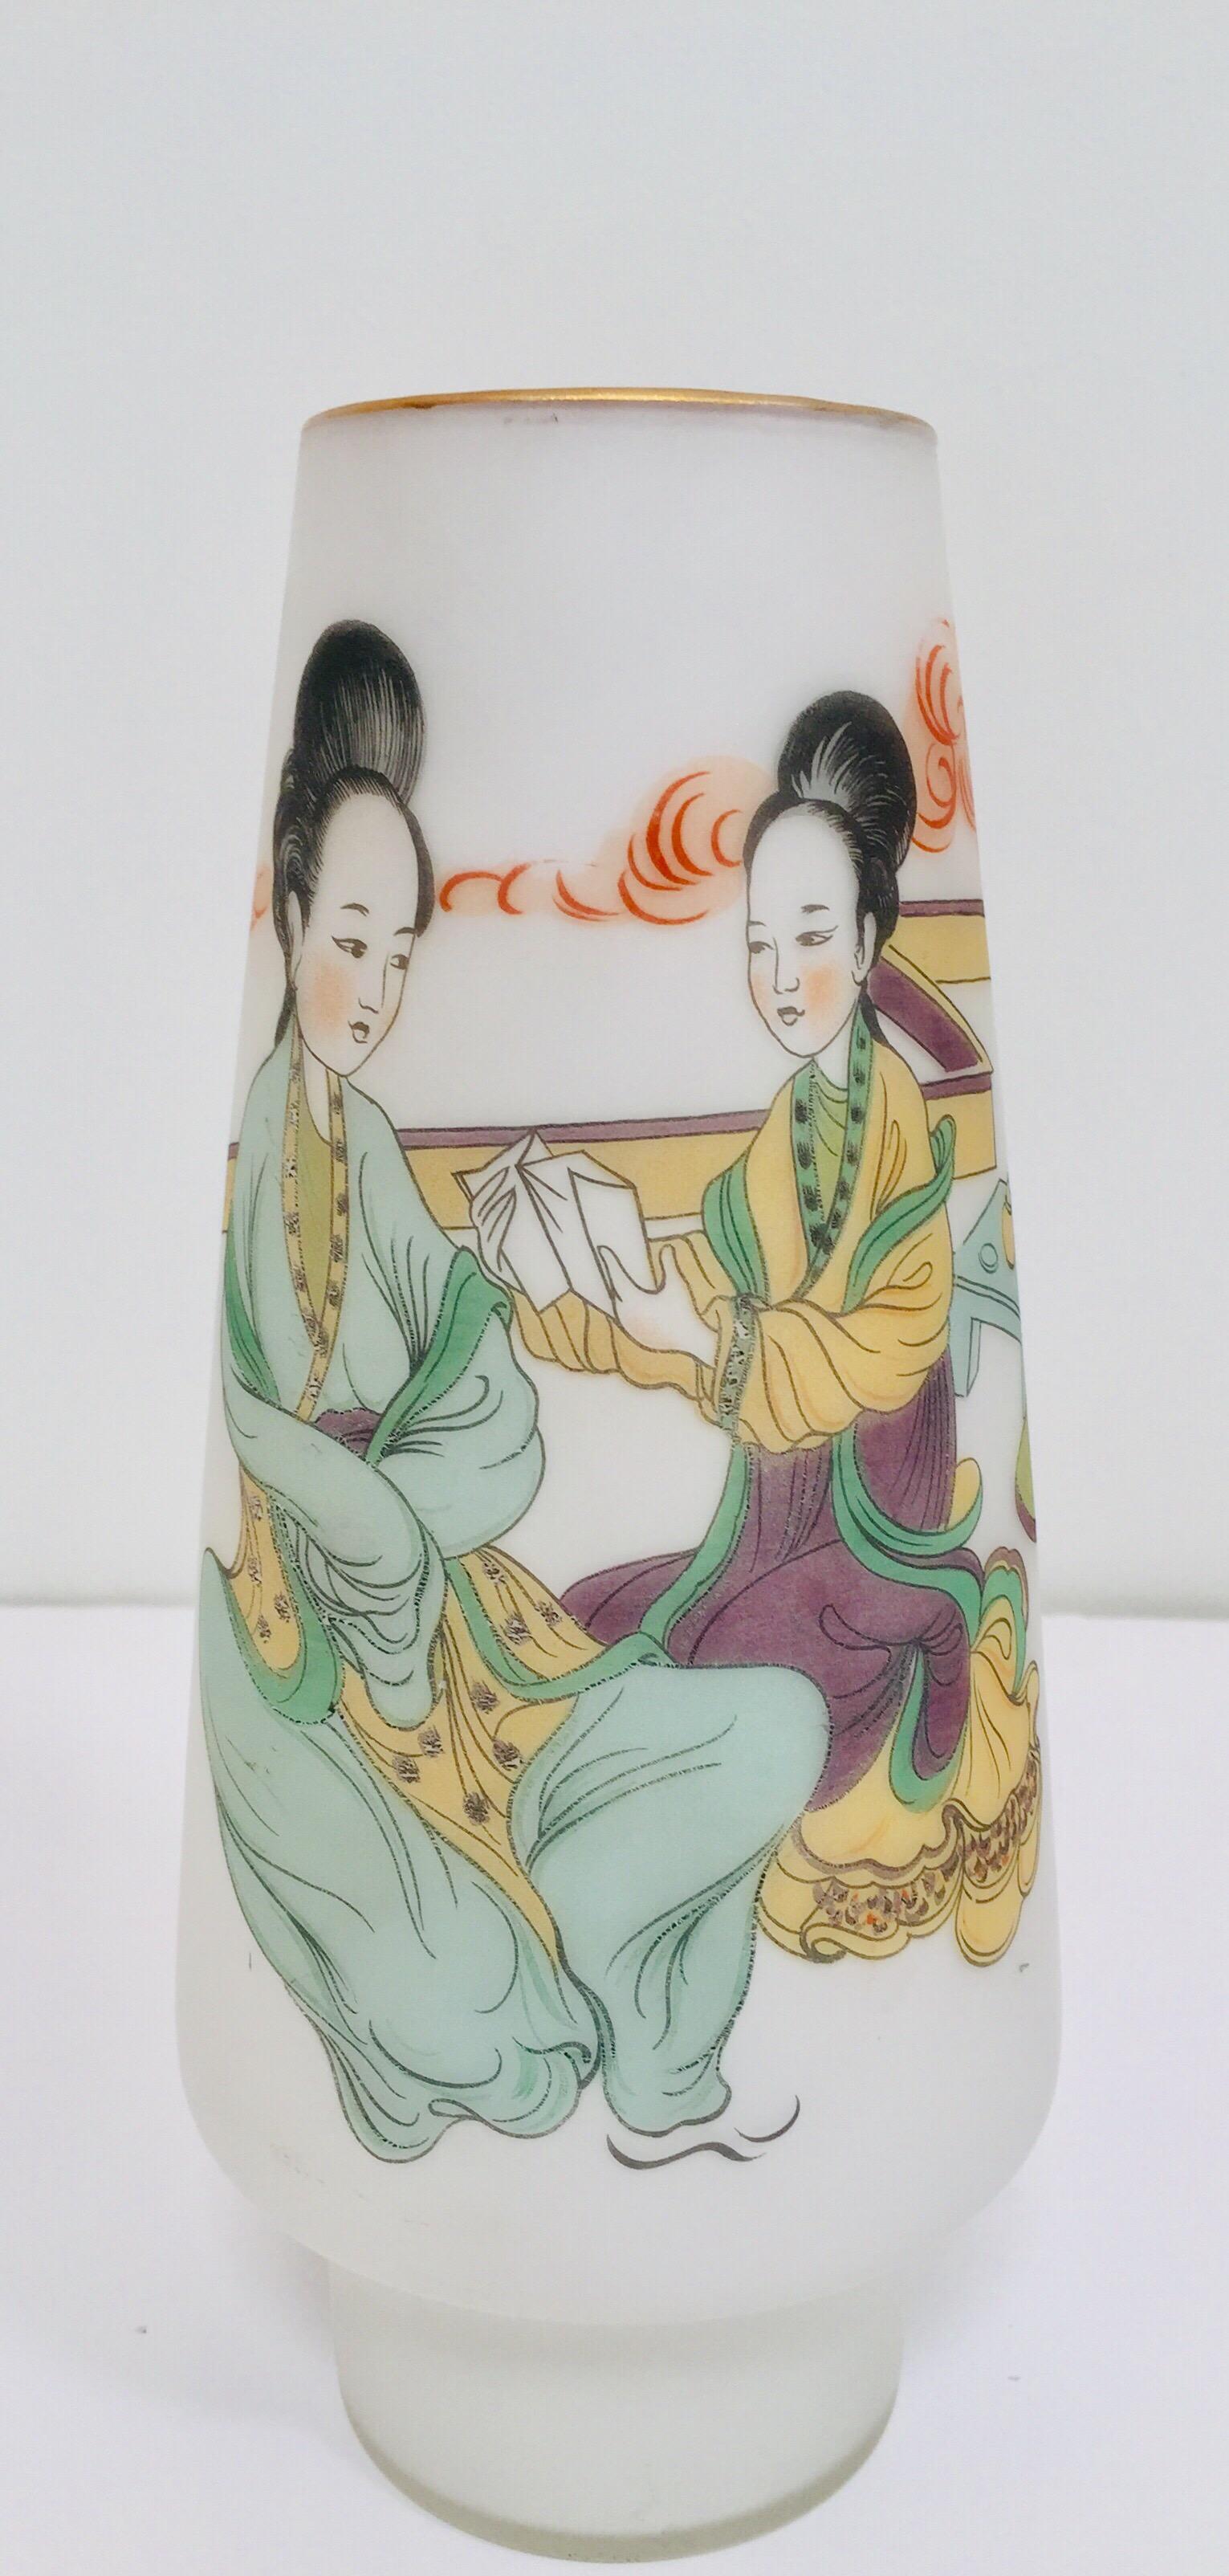 Midcentury Japanese gilded gold rim hand painted opaline glass snow white vase.
The white milky frosted opaline glass vase features two Geisha girls seating on the floor wearing traditional kimonos and reading.
Unique elegant Mid-Century Modern